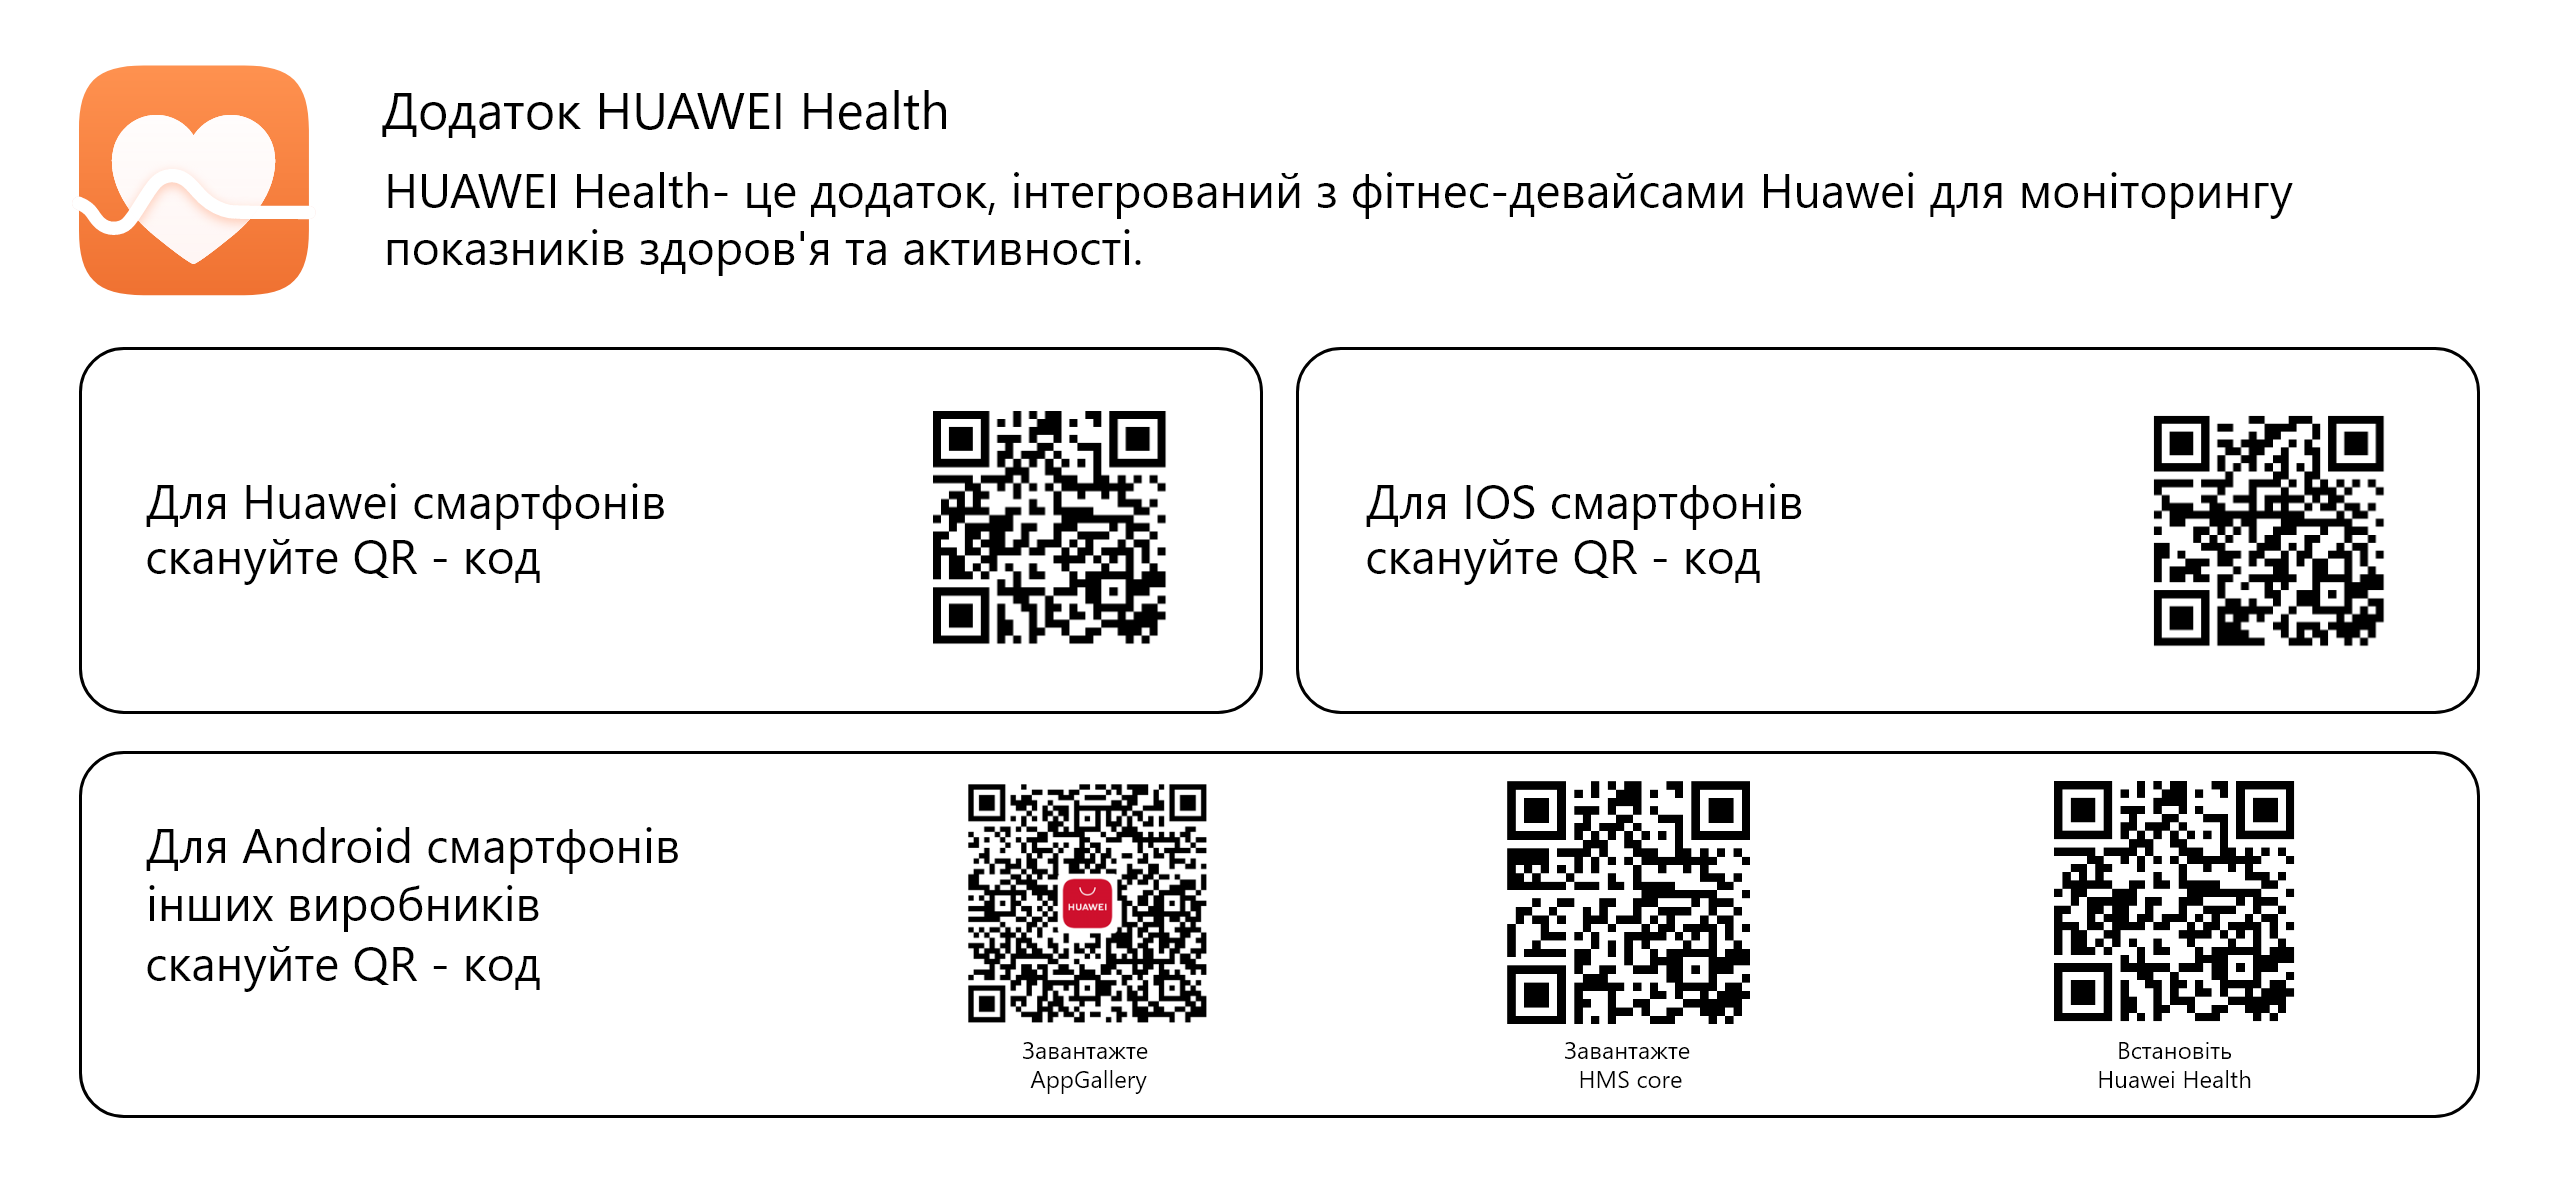 How to download Huawei Health